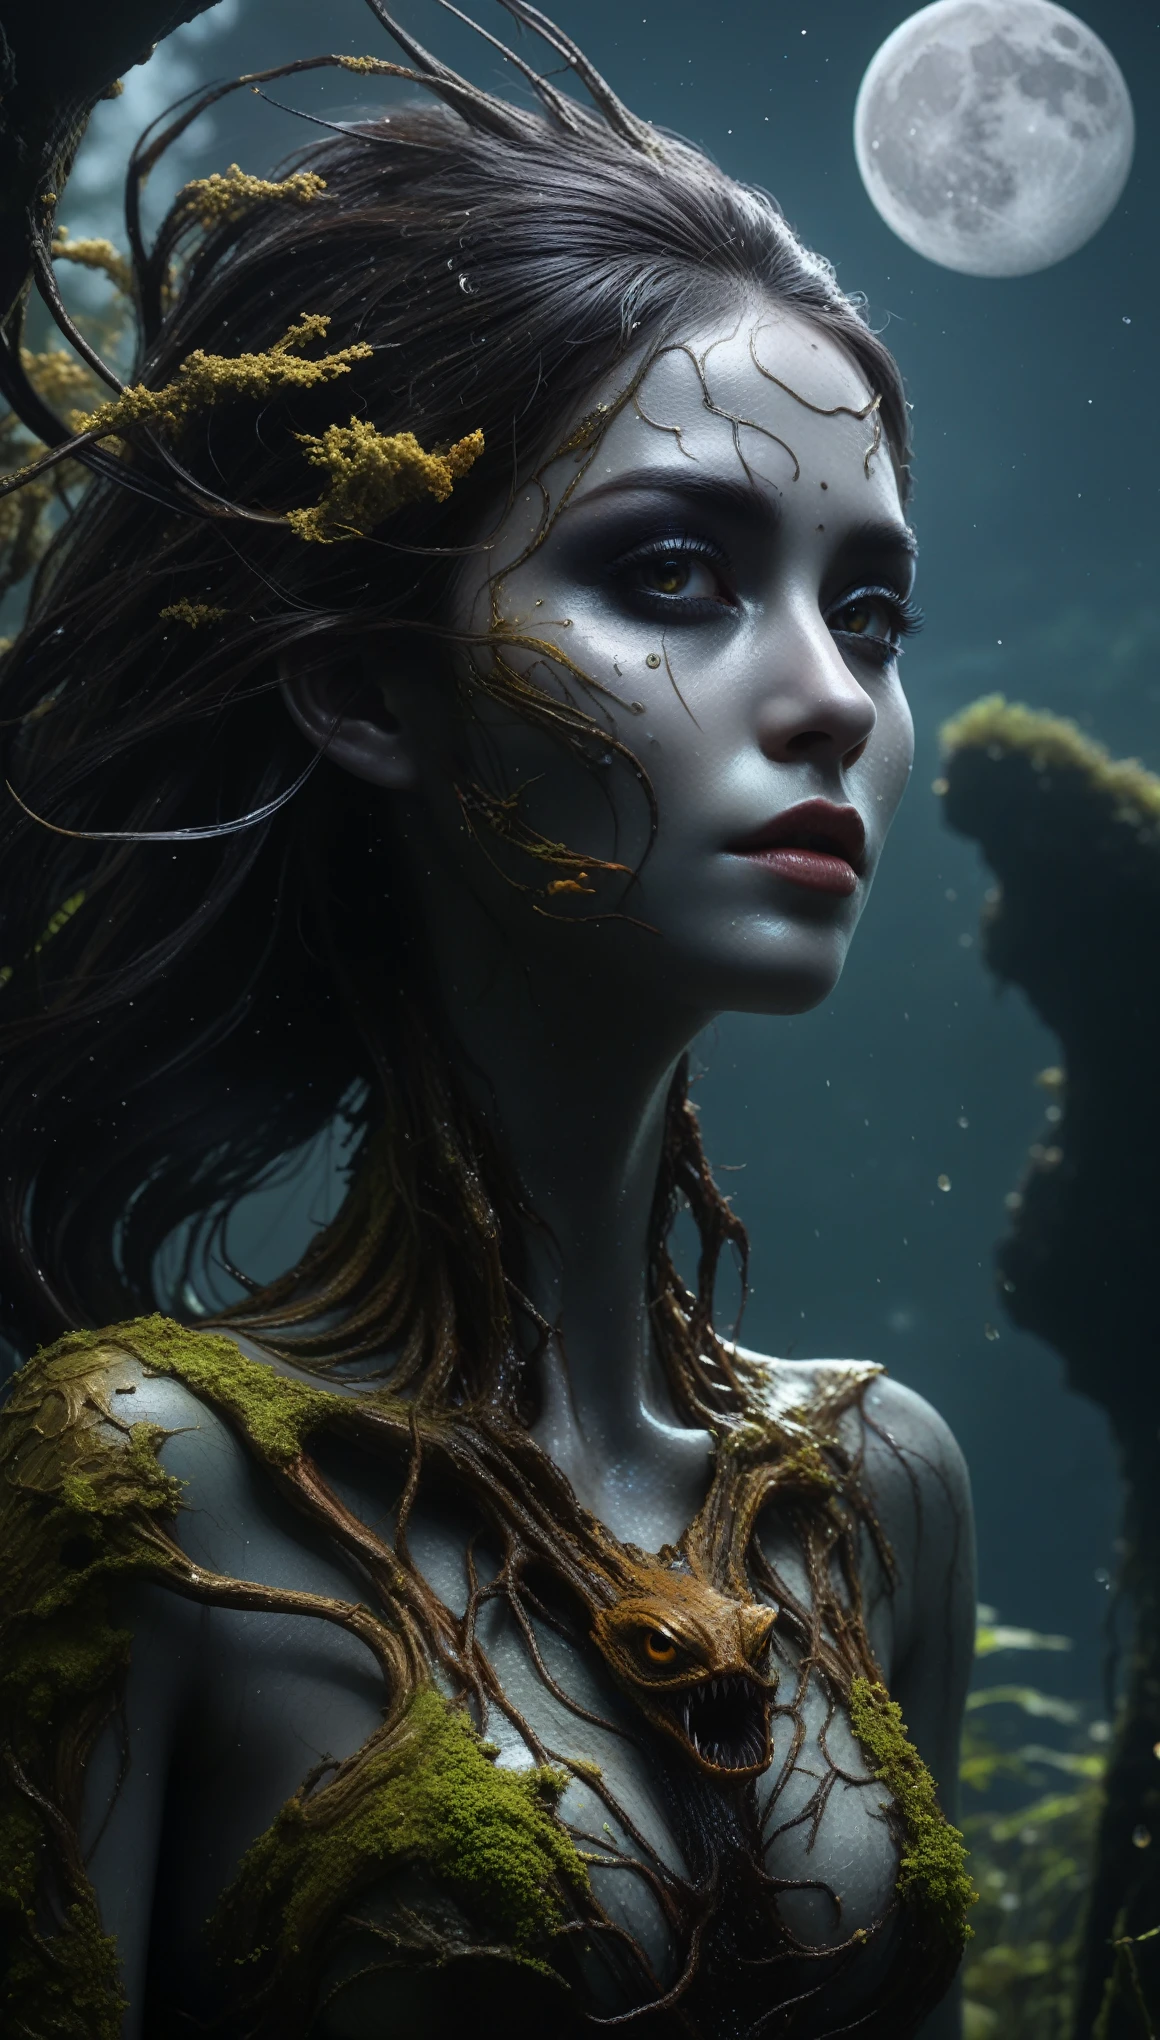 Chalcopyrite Mermaid,moana,golden black make up,longhair,goblin,freckles,pretty face,eyebrow up,full body shot,ominous landscape,glate gray atmosphere,Simon Stalenhag,Nicola Samori,Wangechi Mutu,prime colors,Lisa Frank,city on background,chinesse,pixie,sea,under water,RAW,Retina,full body length,Obsidian Chalsedoon Nightcrawler,ominous landscape, niobium Obsidian atmosphere,dangerous atmosphere,intricate details,realistic humid skin,extremely intricate details,Epic Realistic, cinematic style,film grain,dramatic light,anatomically correct,faded,eyes extremely detailed, high detailed eyes,UHD,Retina,HDR,CinematicTechnicolor,natural skin textures, hyper realism, hyper detailed,High contrast,Realism,Ultra Detailed,irina yermolova,close full body shot, masterpiece,faded,8k resolution,RAW, Nikon Z9,Rakotzbrücke of Germany,(1 terrifying and charismatic monster made from a Cave Swamp tree trunk, have a very pronounced mouth), Branches come out from the head, look at the camera, hypnotic and detailed eyes, built into the tree itself, be confused with them, dark energy, spectrum, very detailed, Natural light, Posthuman, face, neutral, meat, The horror of the universe, alien organic nightmare, fantasy, dream as art, higher resolution,8K,QG, very detailed 8K wallpaper, Complex, high detail, sharp focus, dramatic (full moon), realist, works of art, better quality, space, universe, magic, Complex, very detailed, kind, sharp focus, dramatic lighting, chromatic aberration, Depth of the bounds written, soft lighting, ,tentacles from skull full moon, transmitted by blood, corporal horror